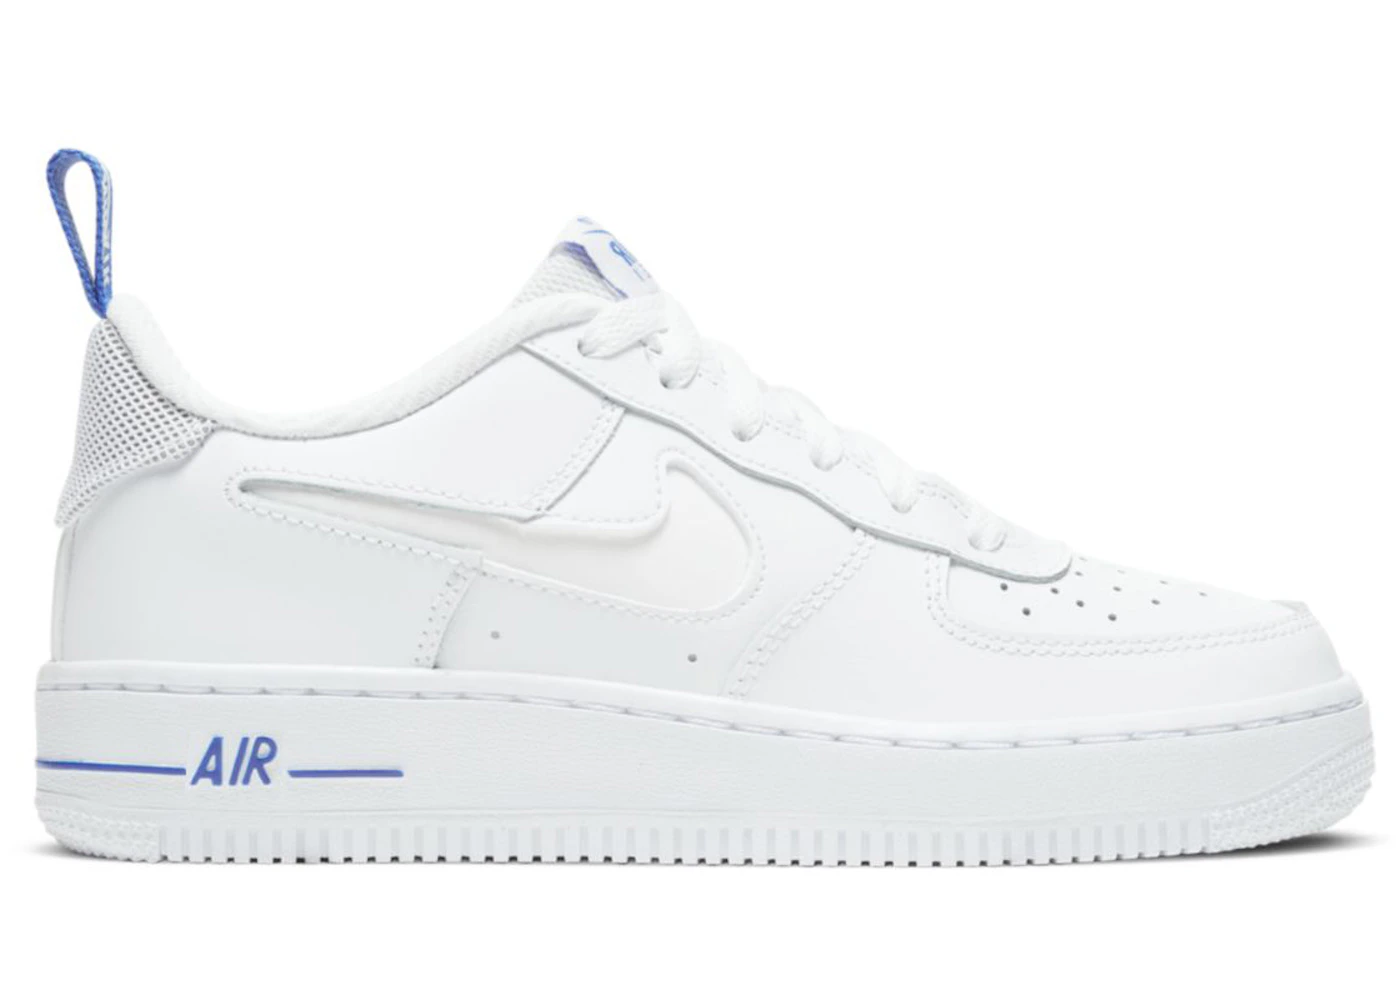 Nike Air Force Low 07 LV8 White Racer Blue (GS) - DD3227-100 - US